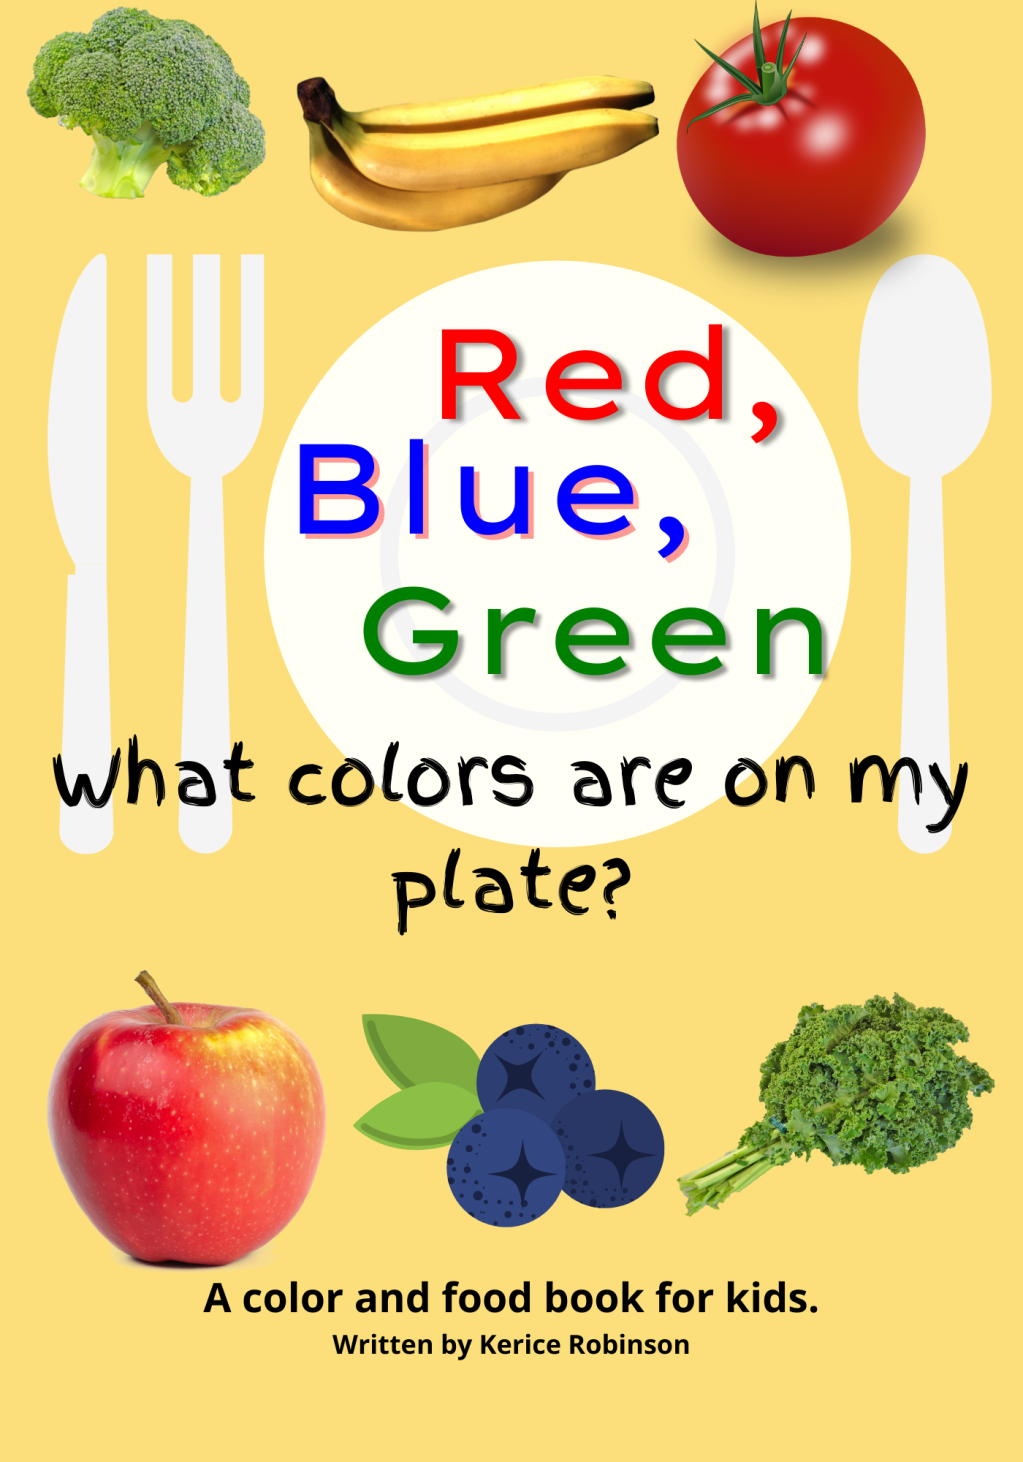 FREE Children’s e-book “Red, Blue, and Green! What Colors Are On My Plate?”